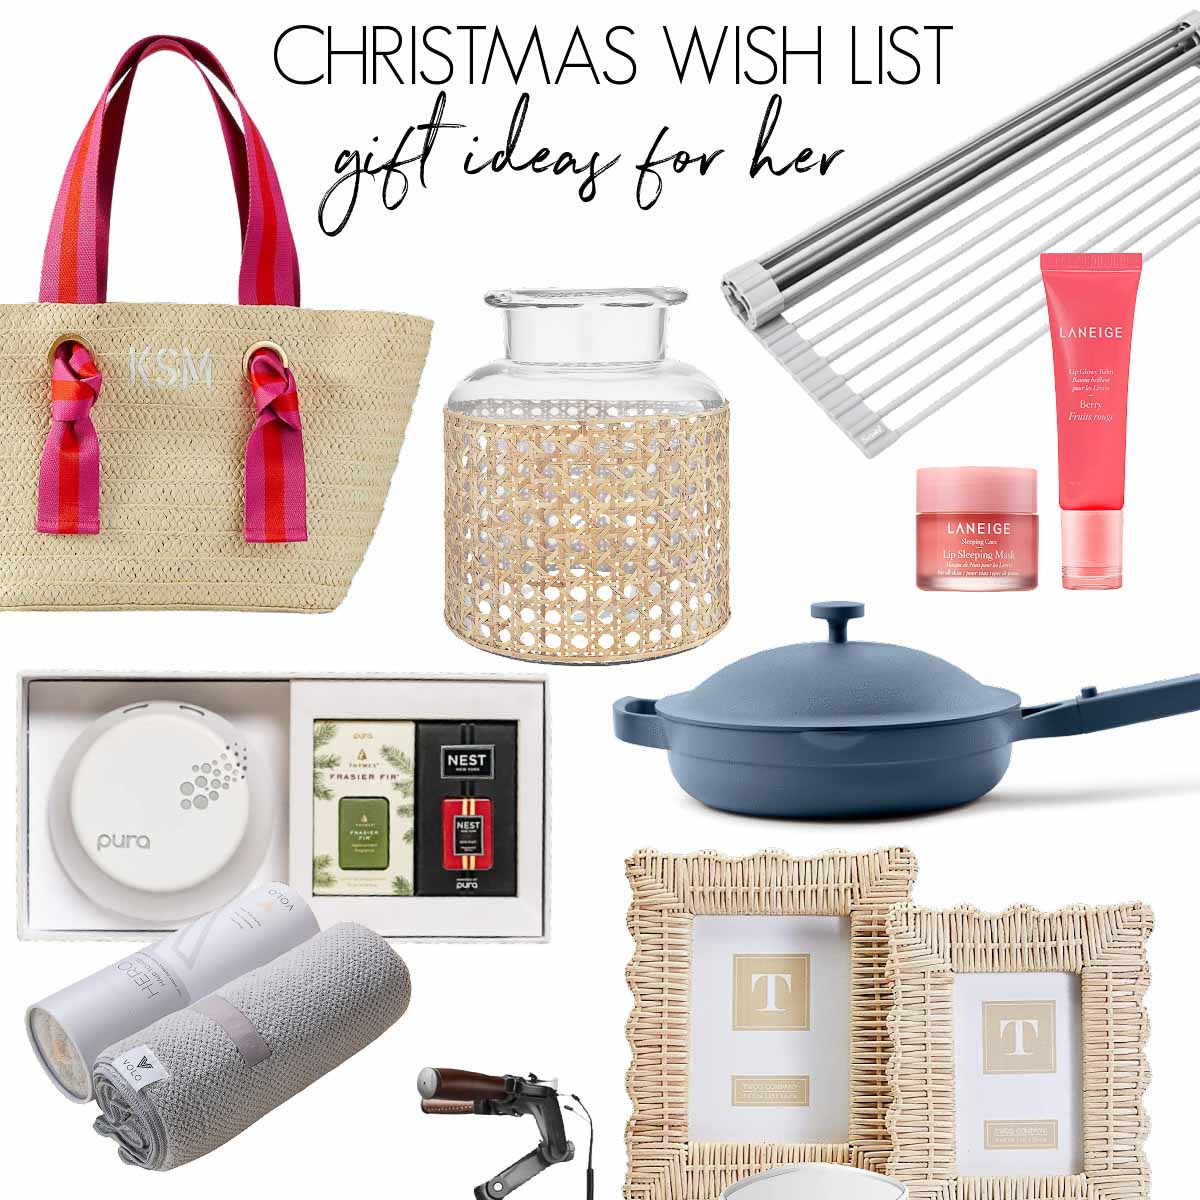 Christmas Wish List Ideas 2022: My Family's Favorite Gifts! - Driven by Decor